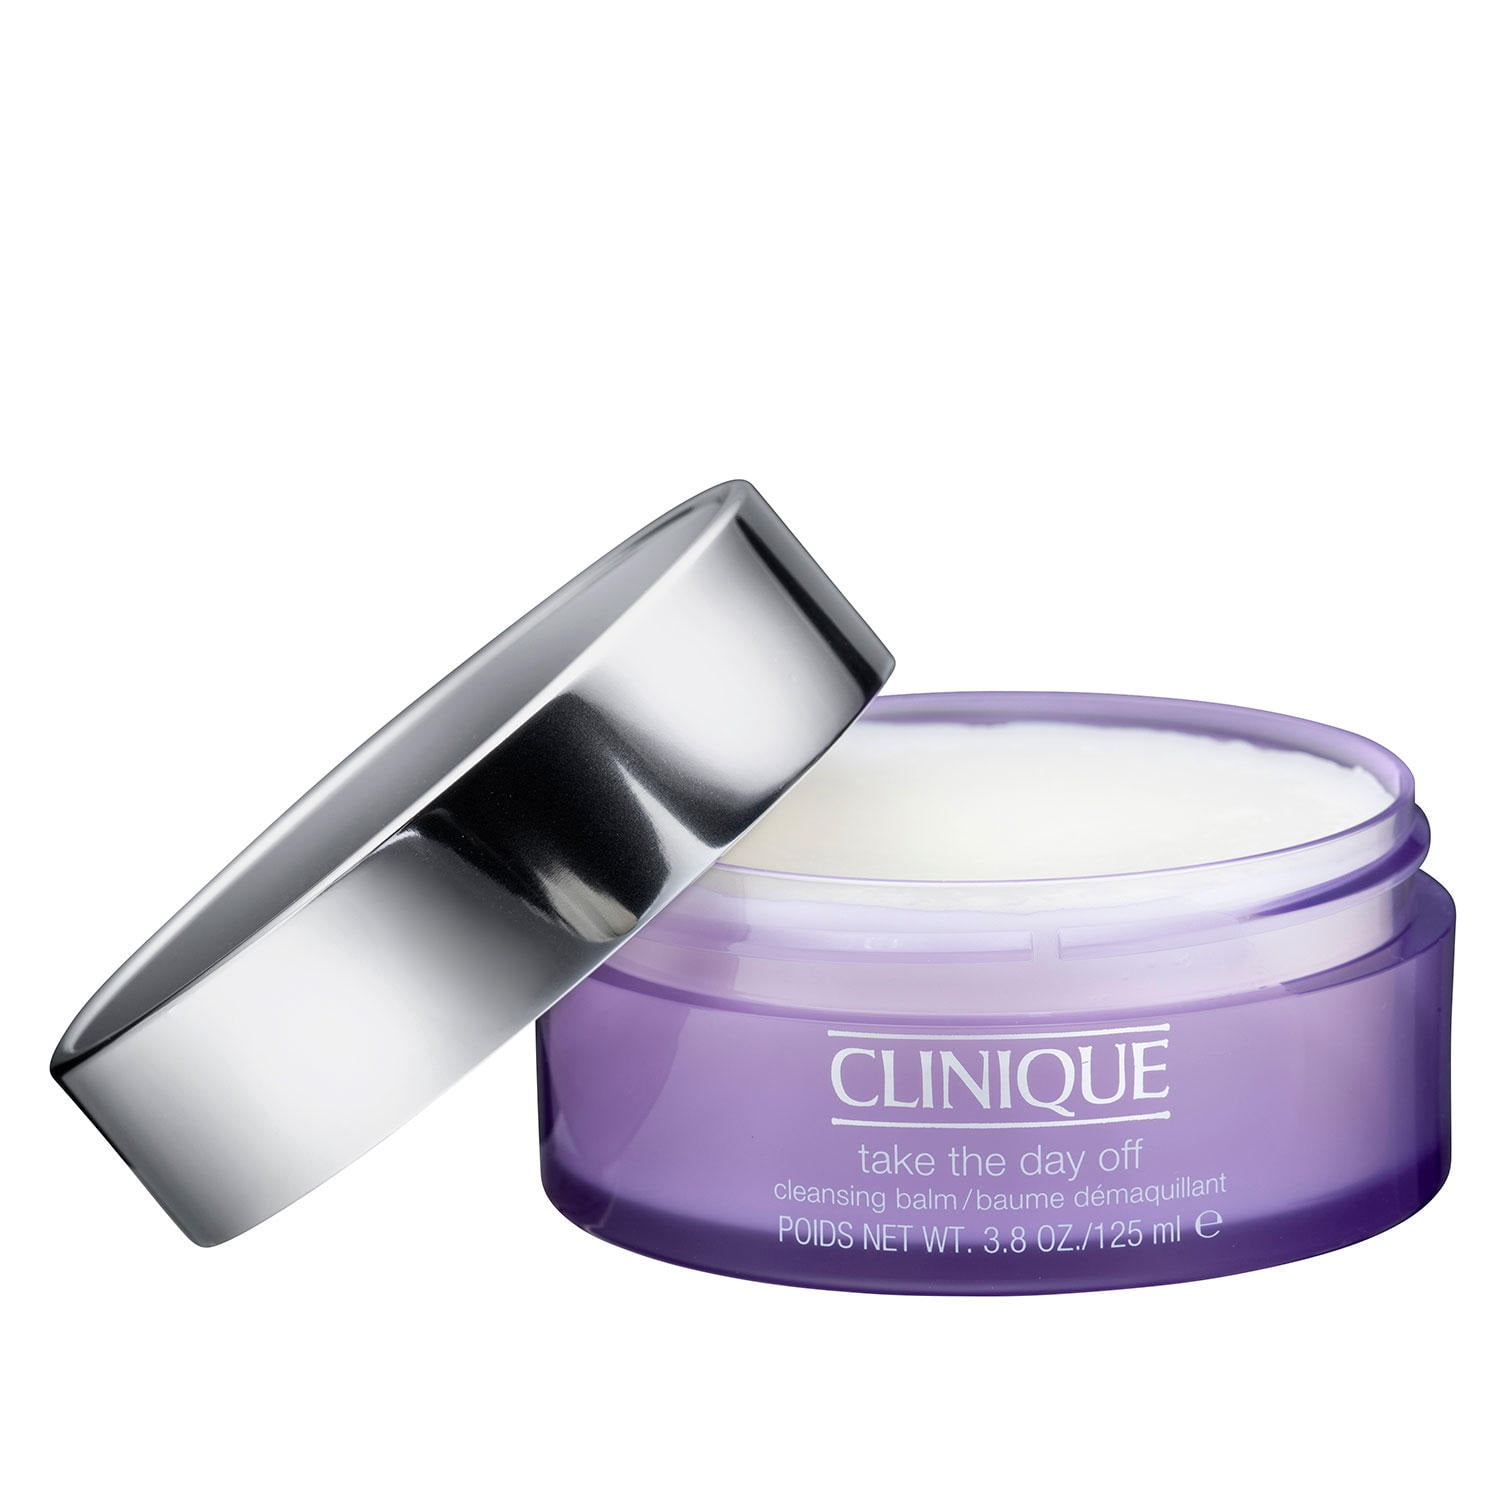 Clinique Take Balm, Off The oz Cleansing 3.8 Day